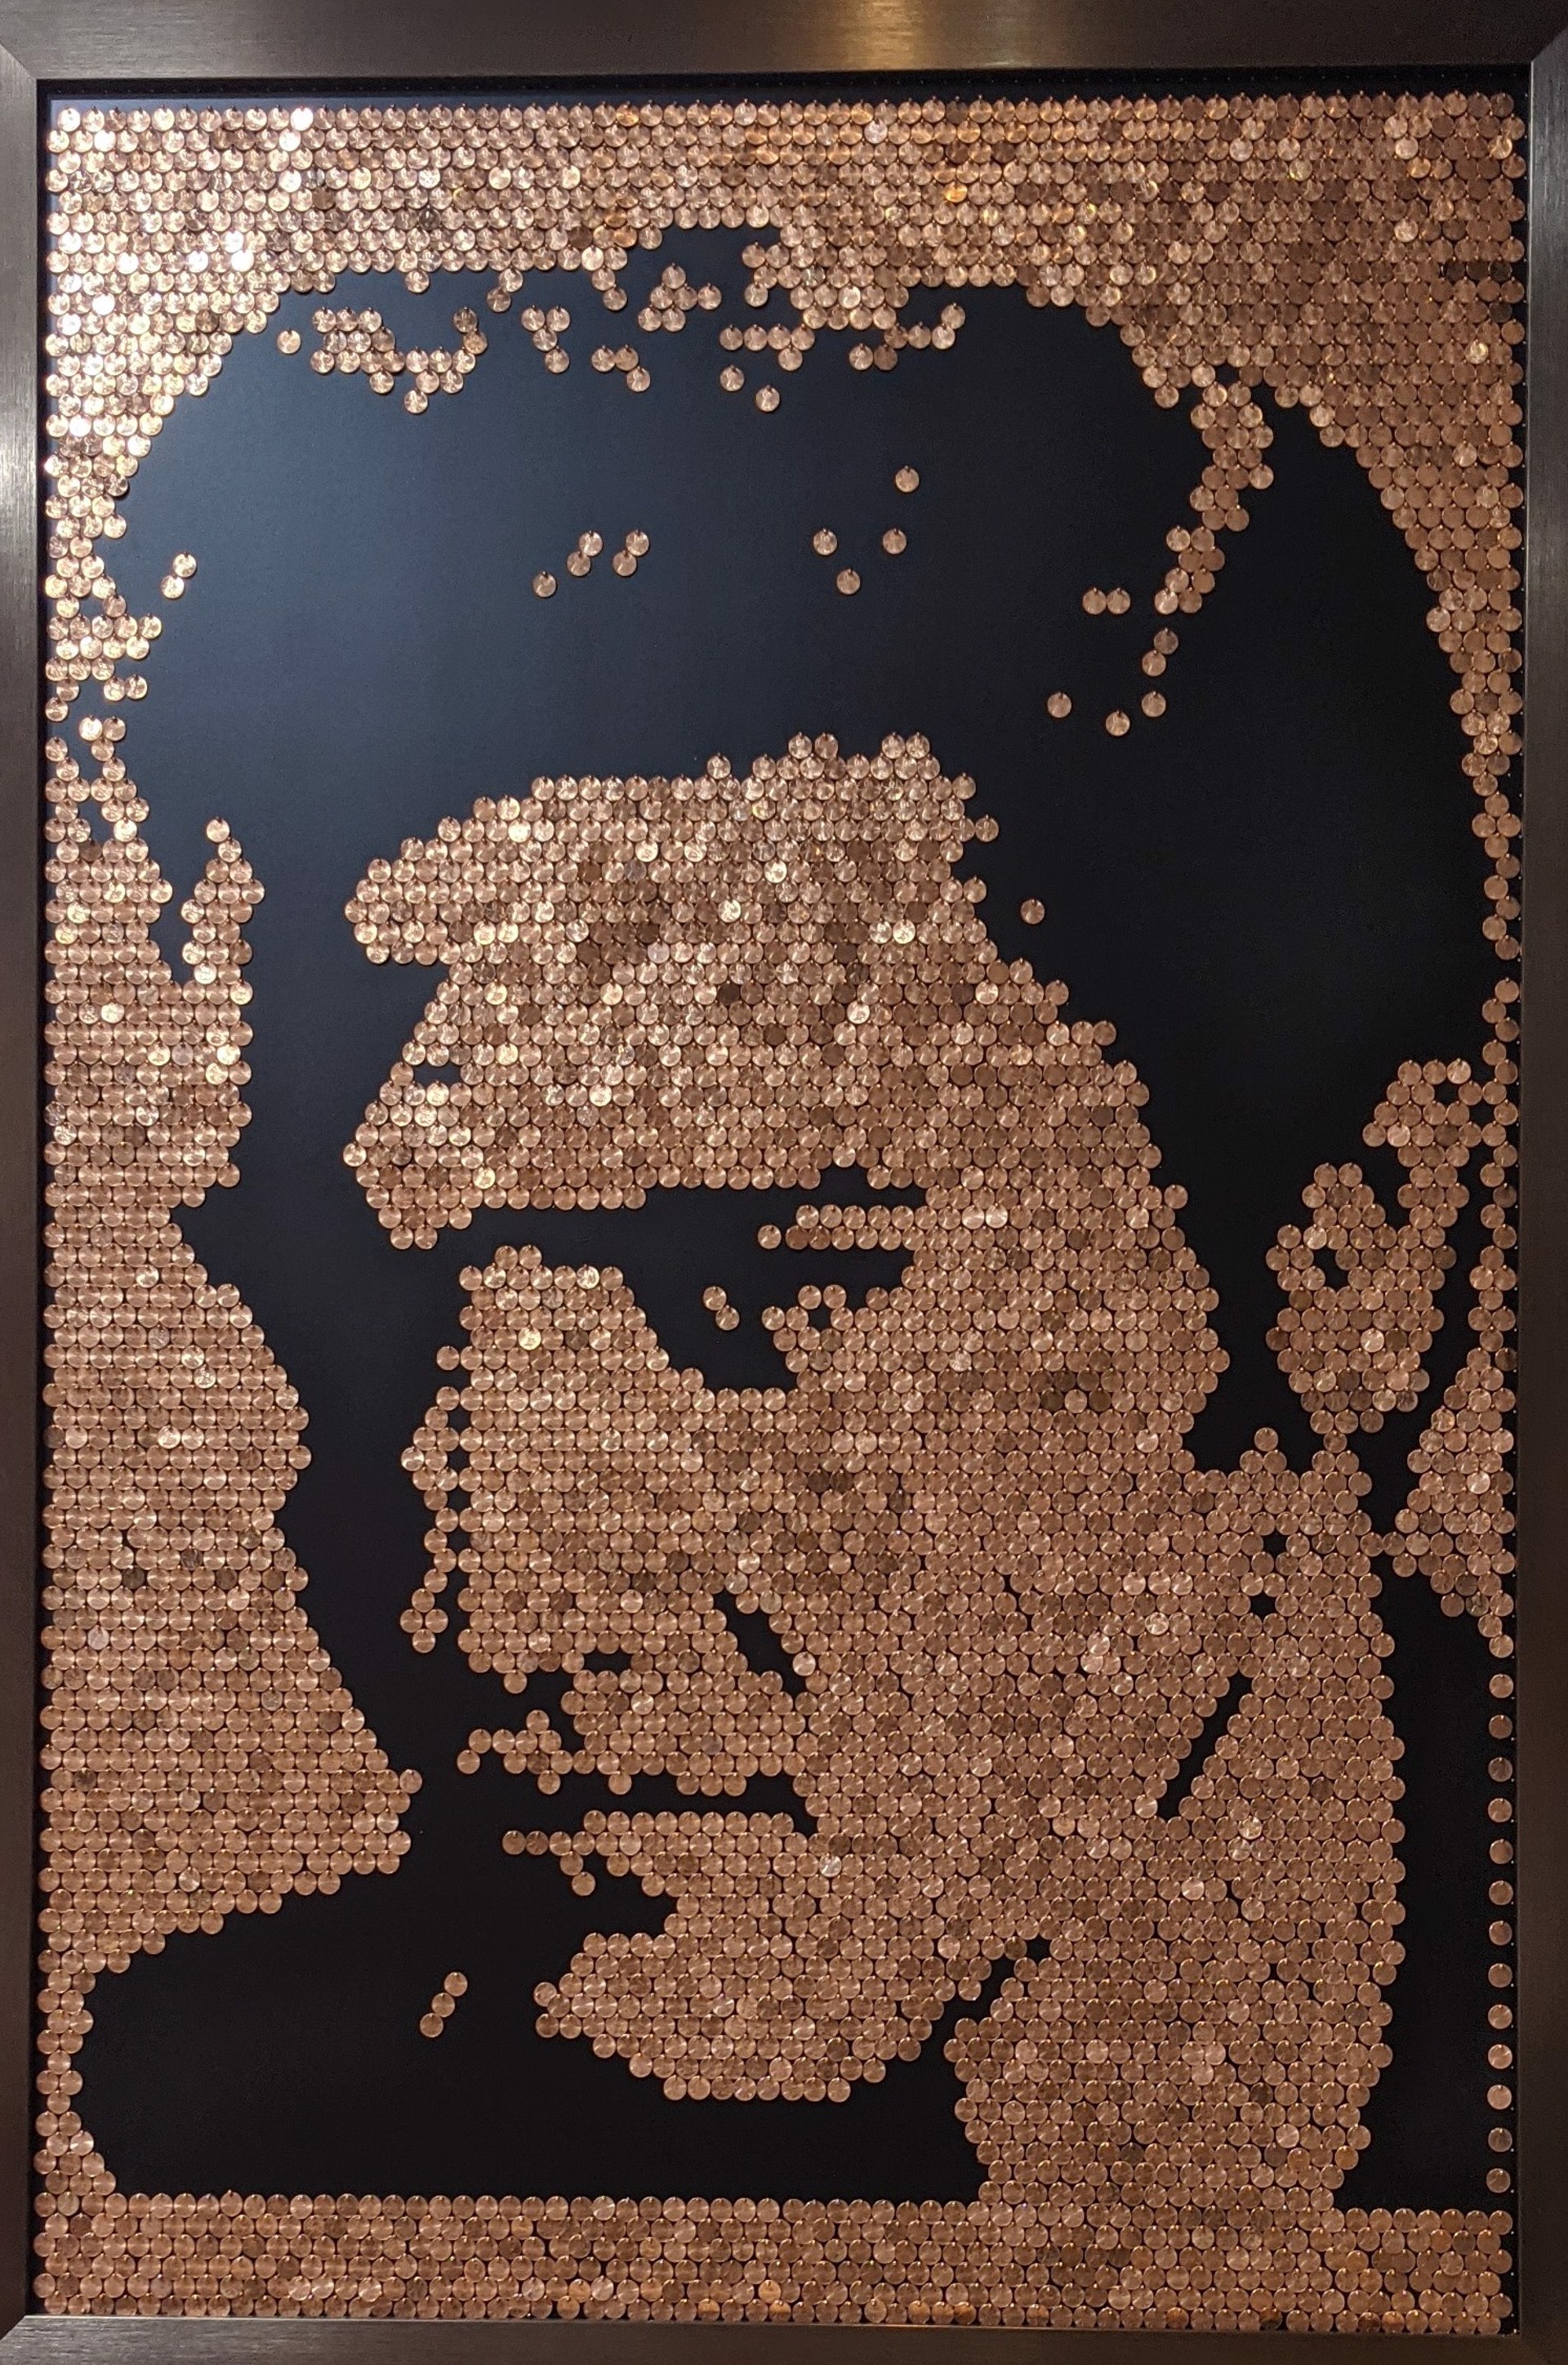 Penny Face "Elvis Presley" by Coins & Sequins On Canvas by Efi Mashiah